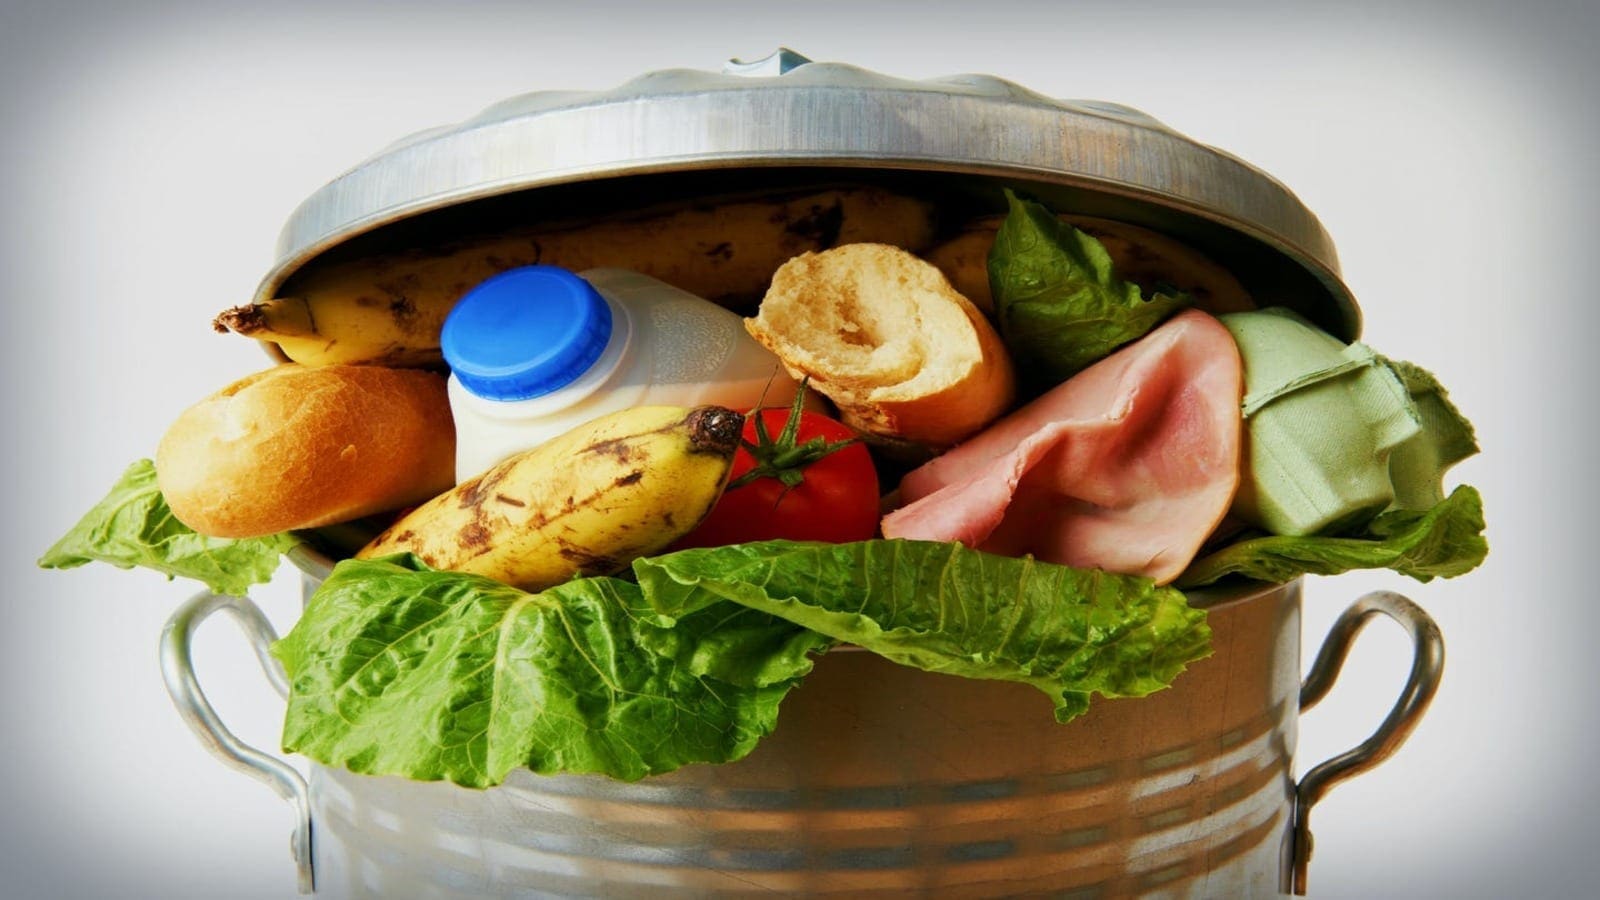 China steps up efforts to fight food waste with new laws, campaigns